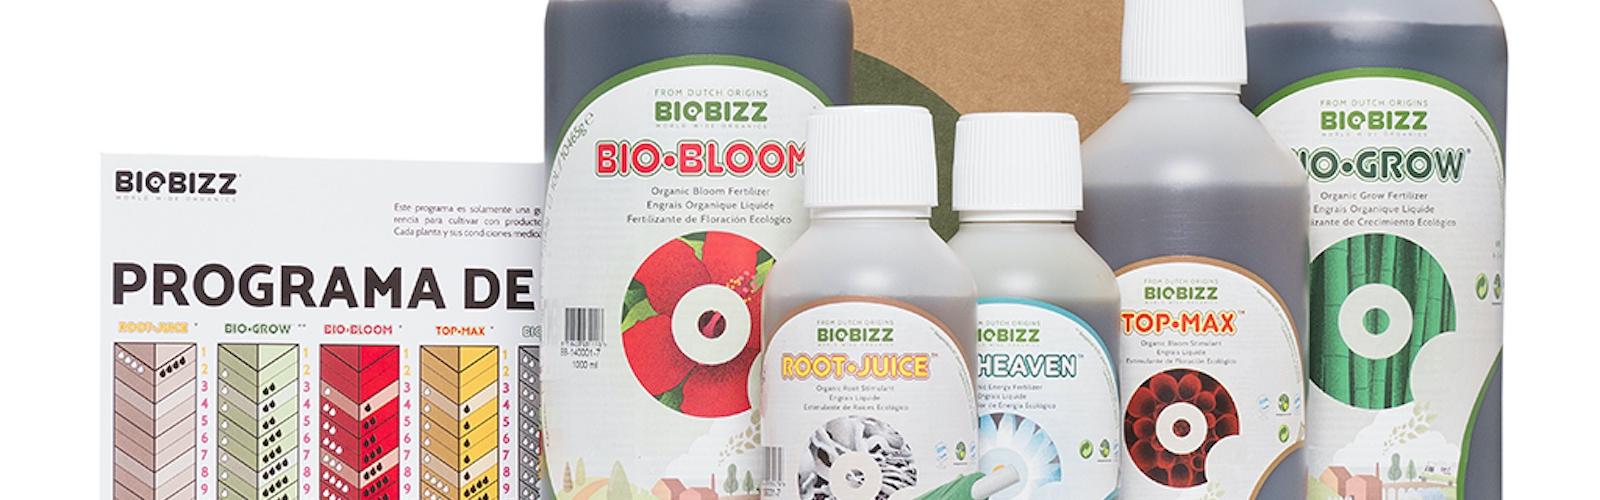 Biobizz feeding schedule, fertilizers and instructions for use